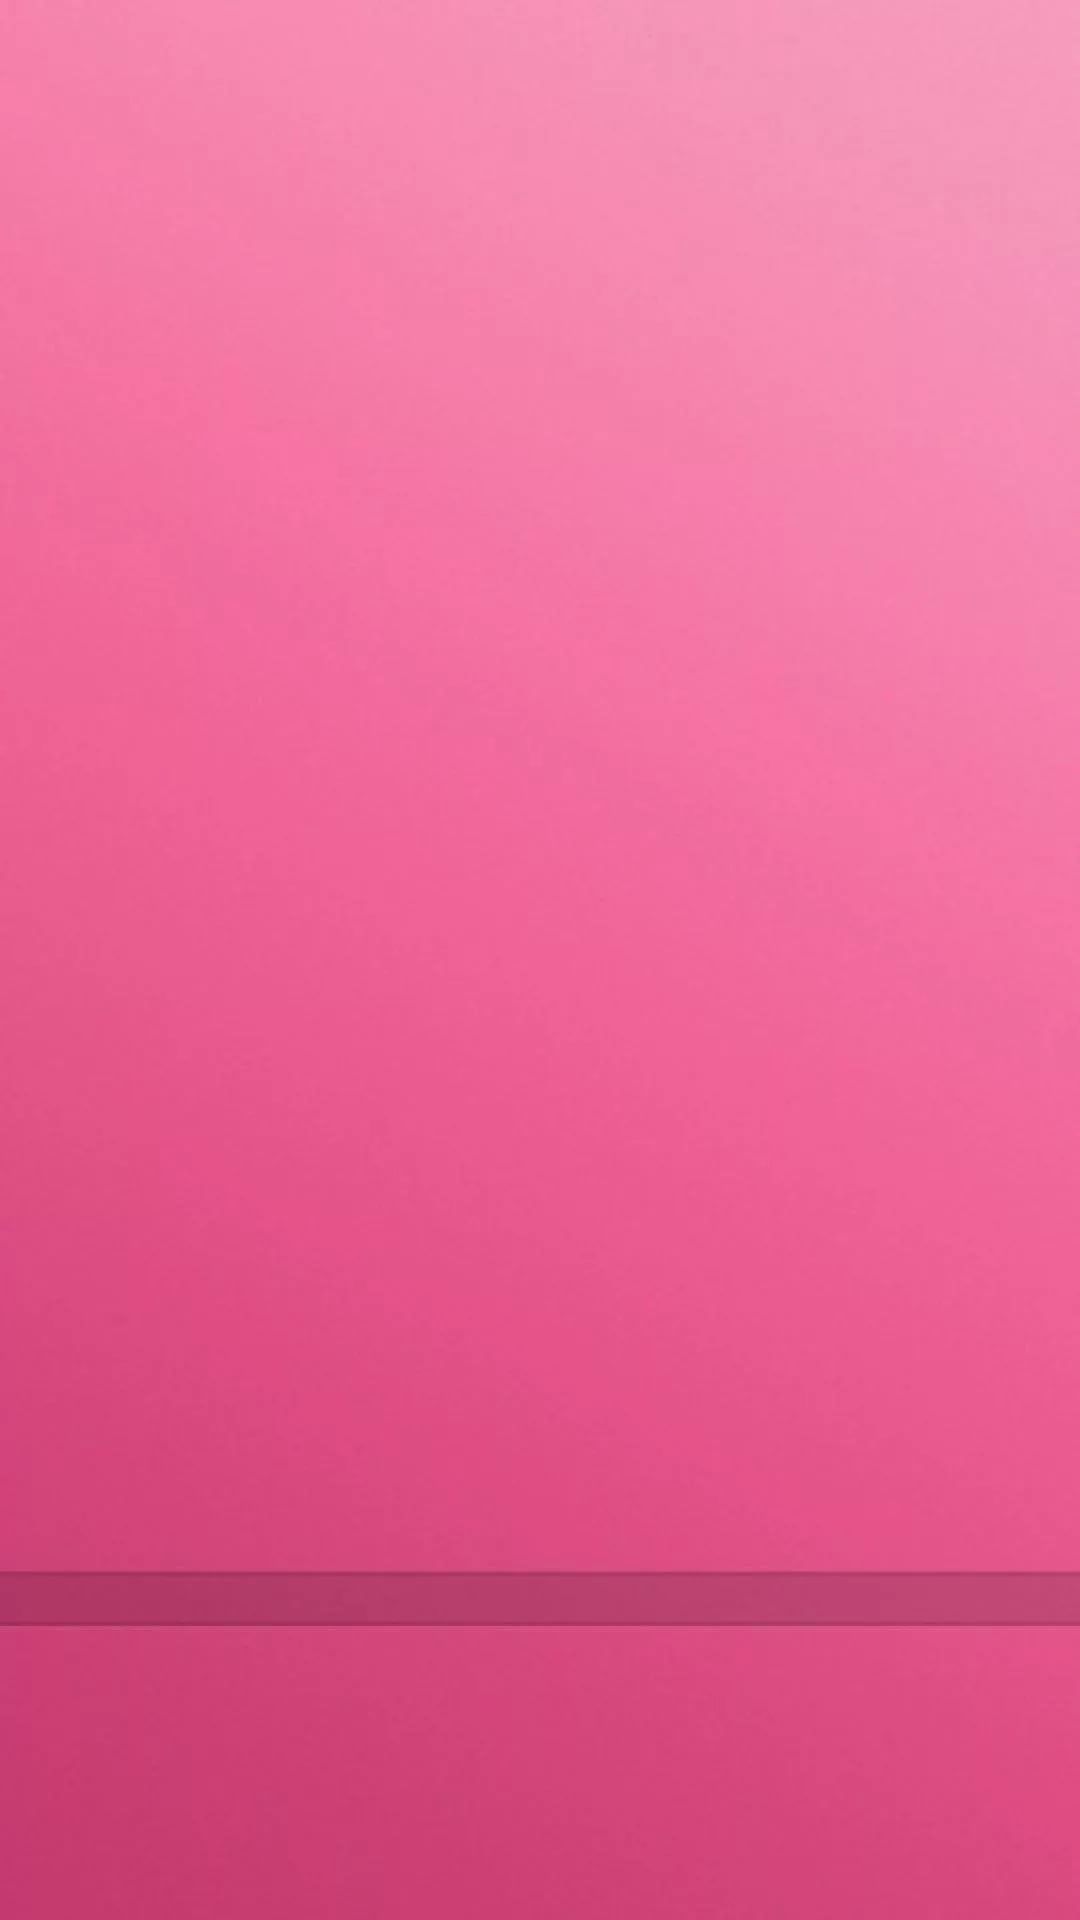 Solid Pink phone wallpaper